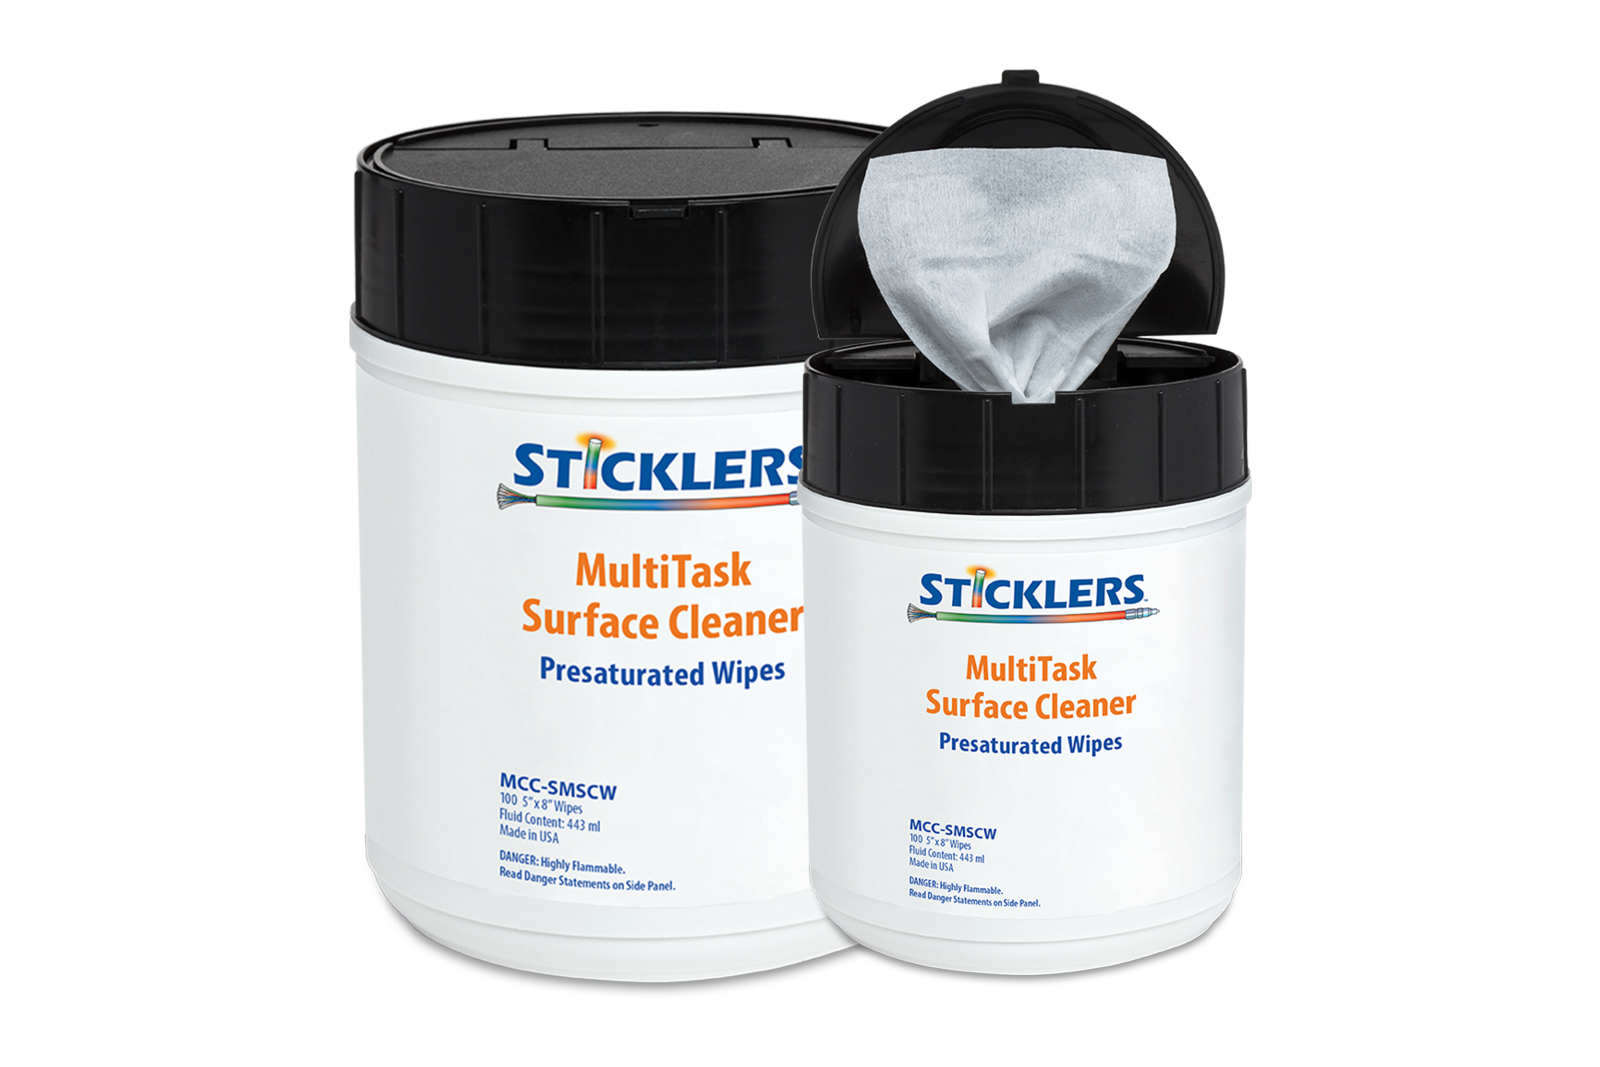 MultiTask Surface Cleaner Presaturated Wipes mcc-smscw mcc-smscwr